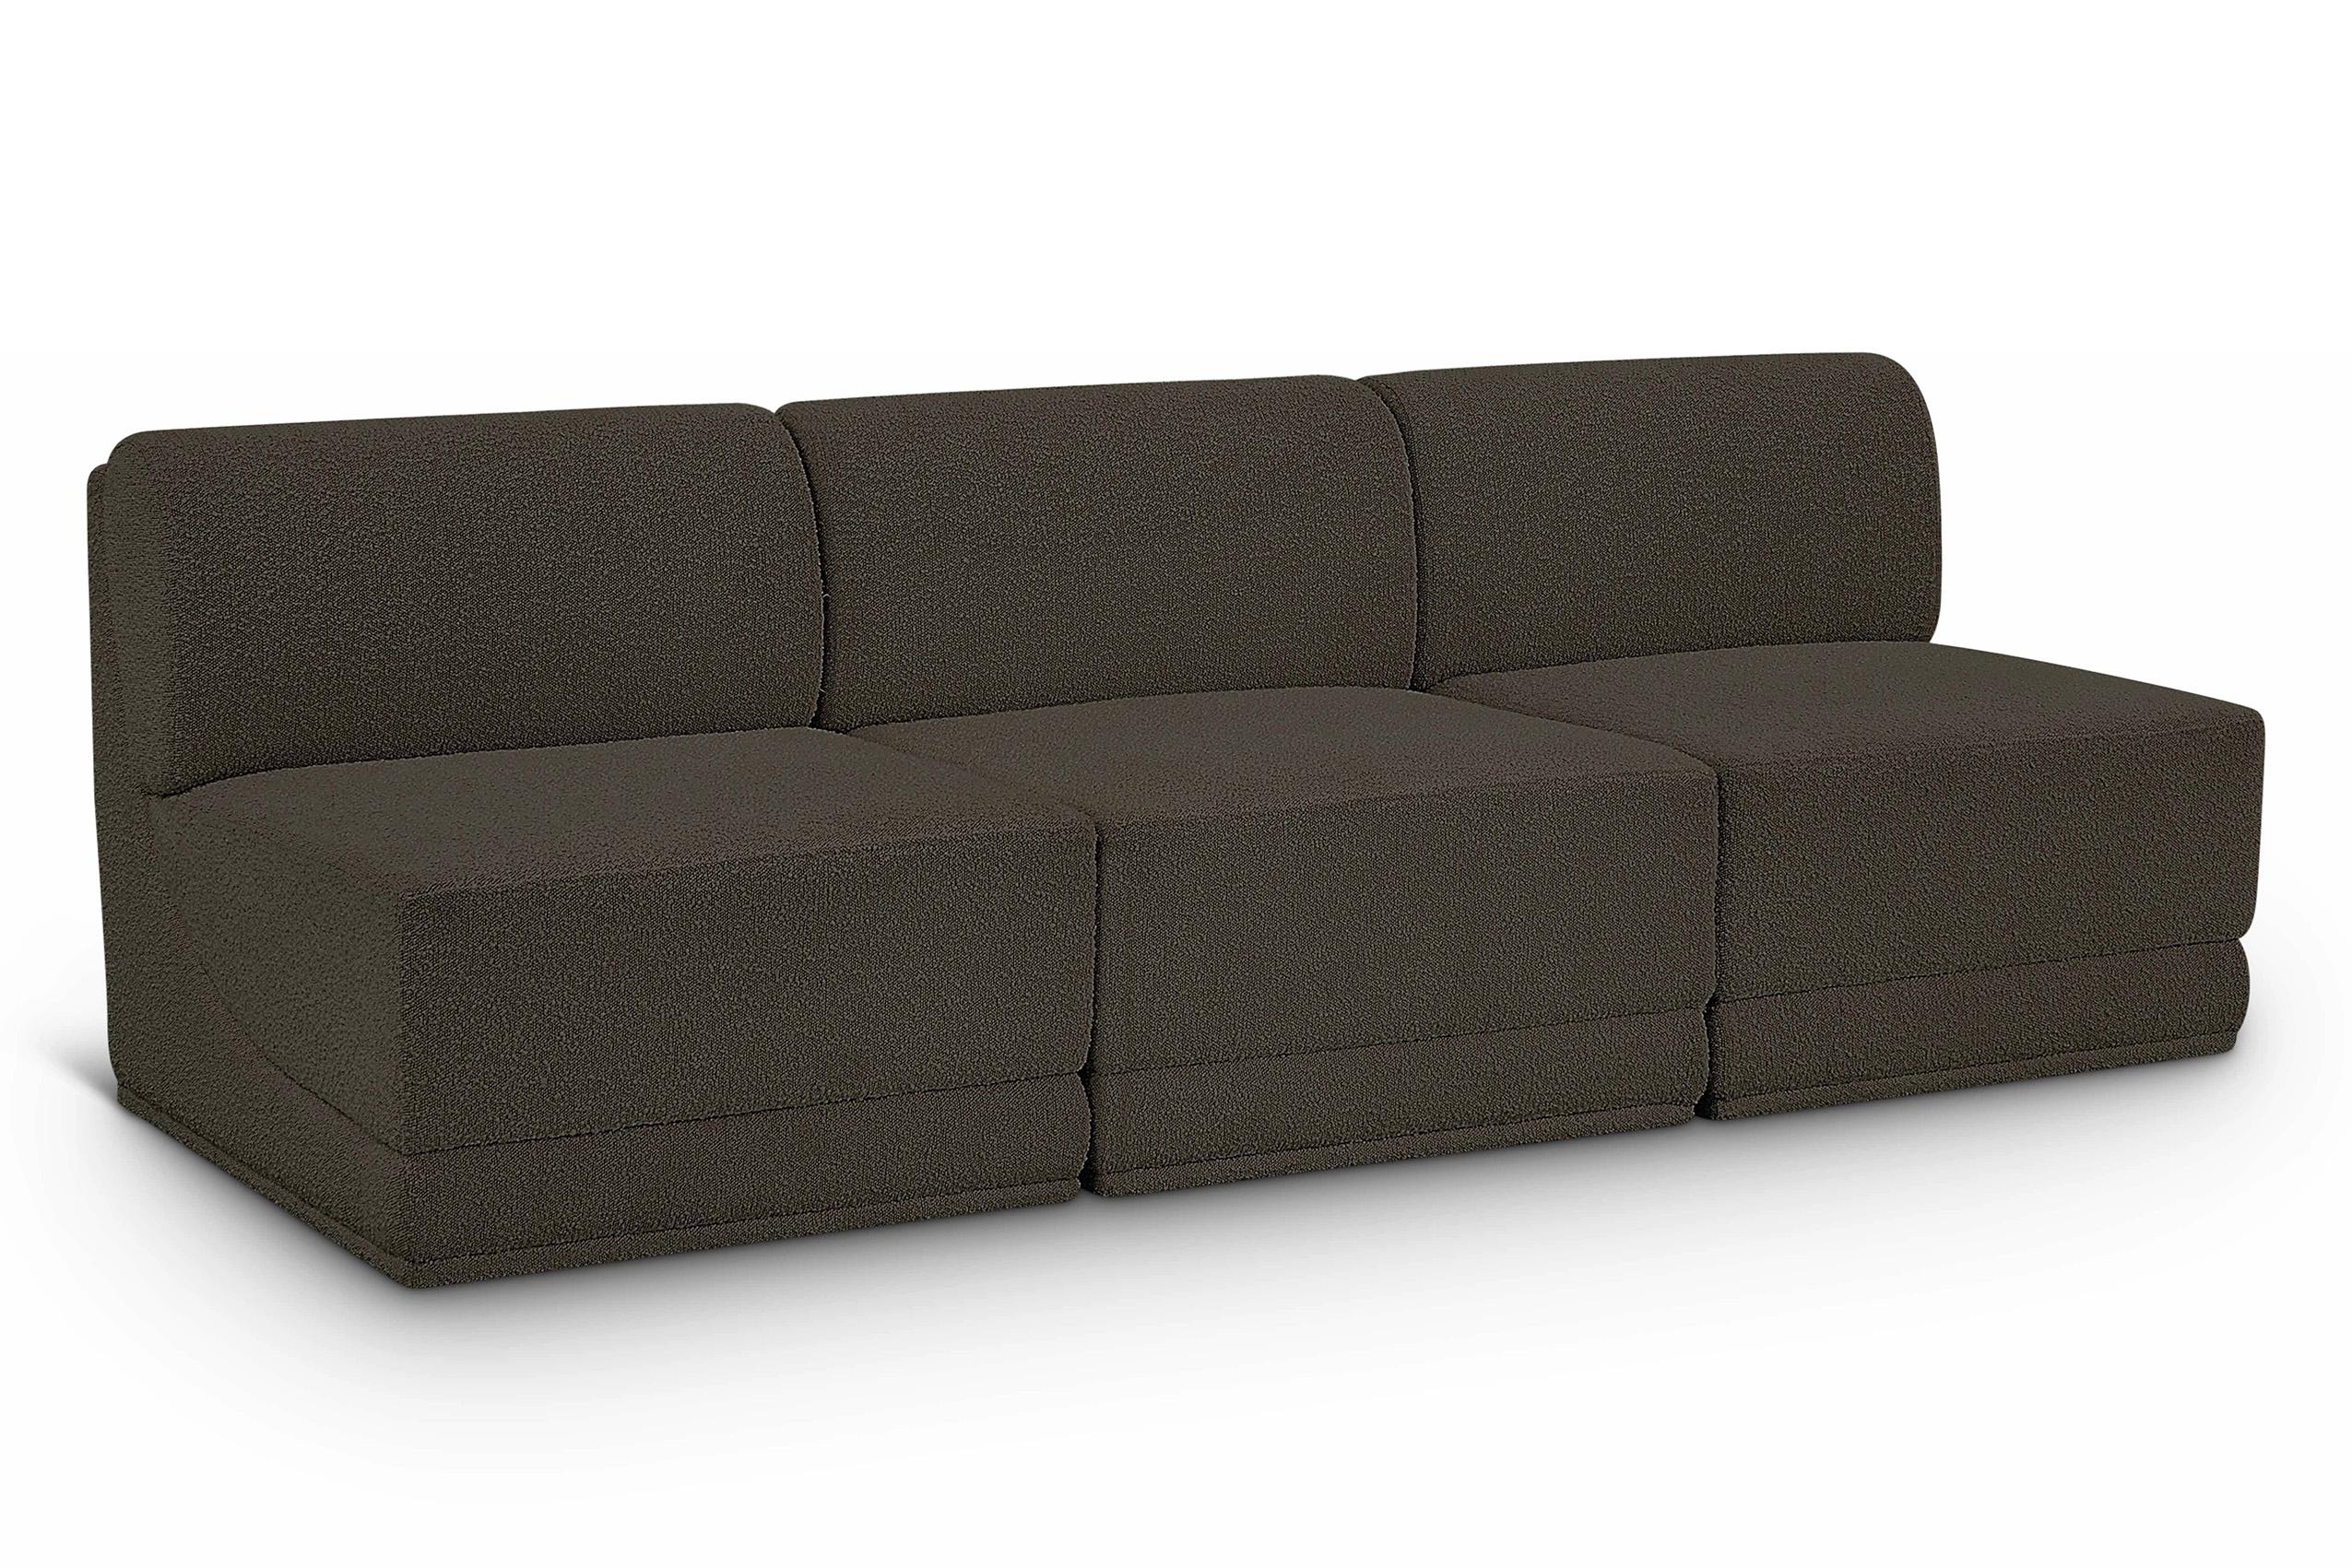 Contemporary, Modern Modular Sofa Ollie 118Brown-S90 118Brown-S90 in Brown 